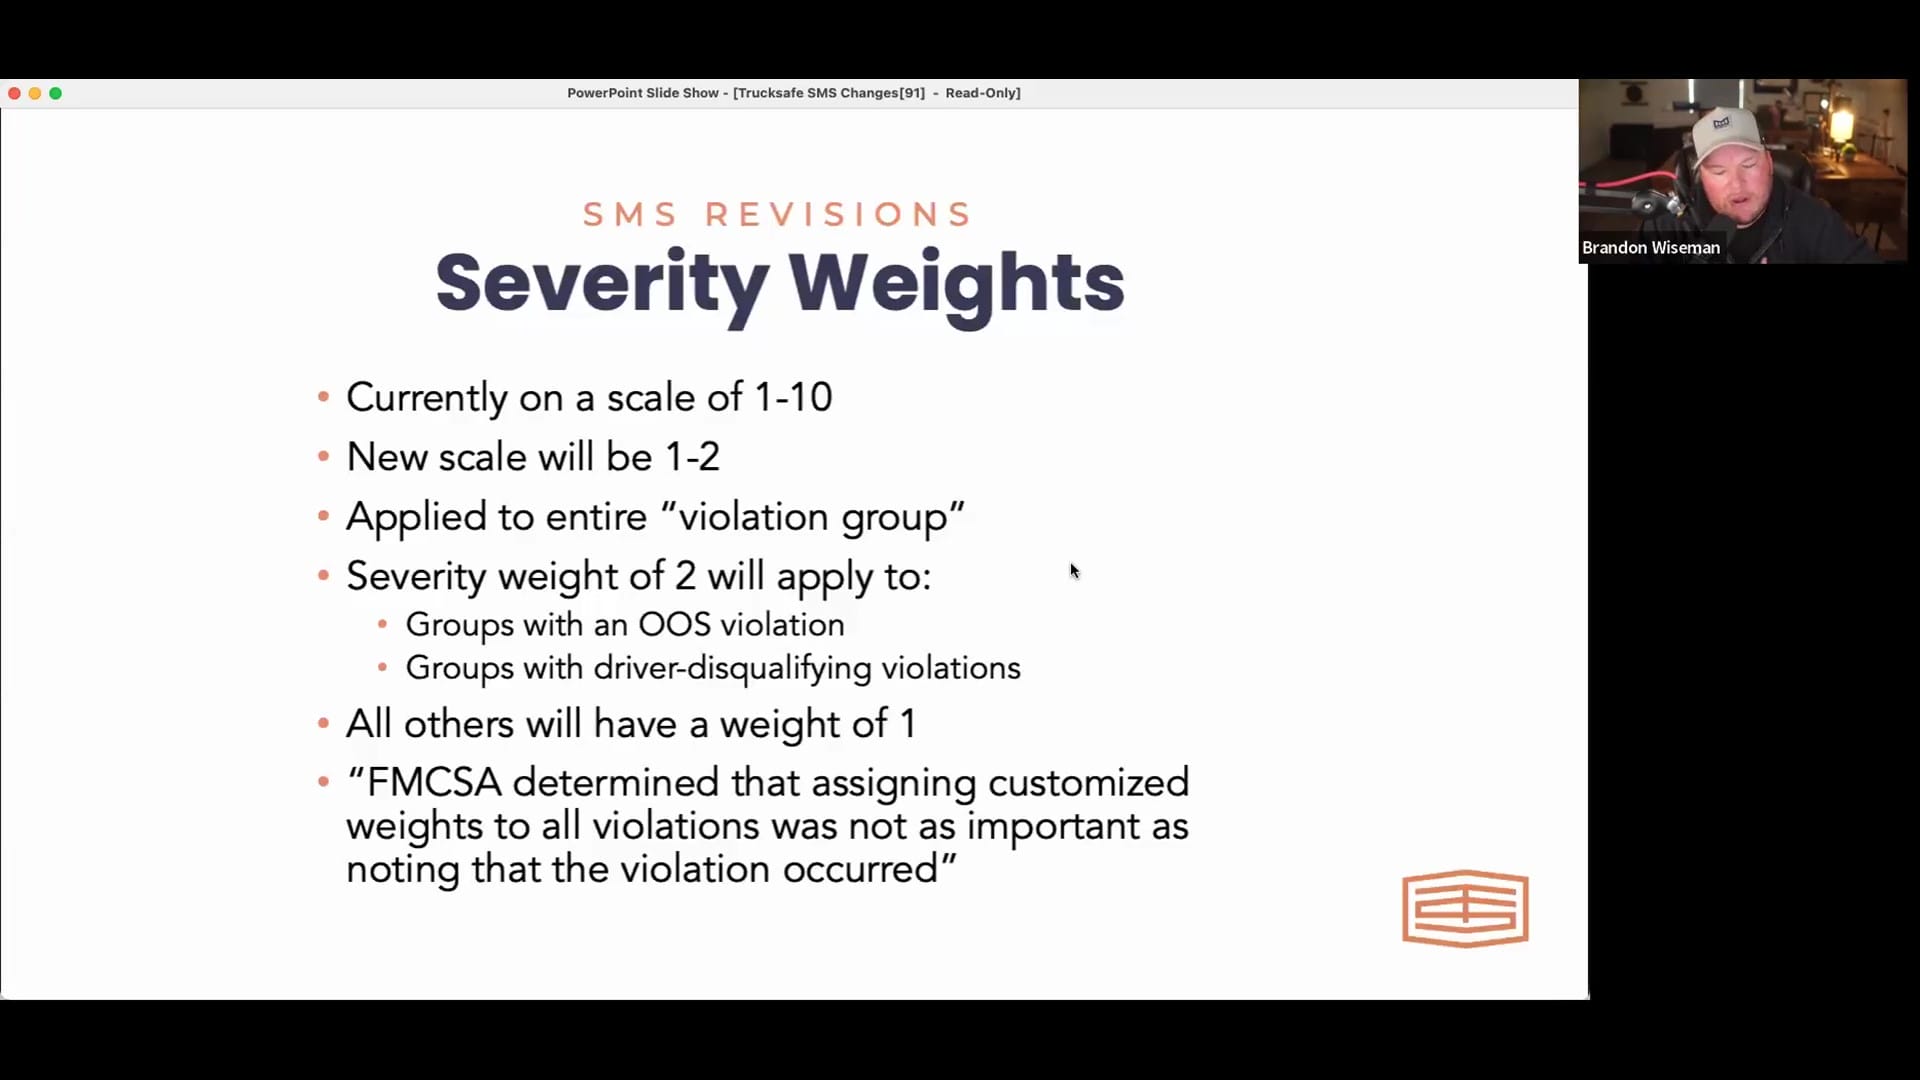 SMS Revisions FMCSA Severity Weights